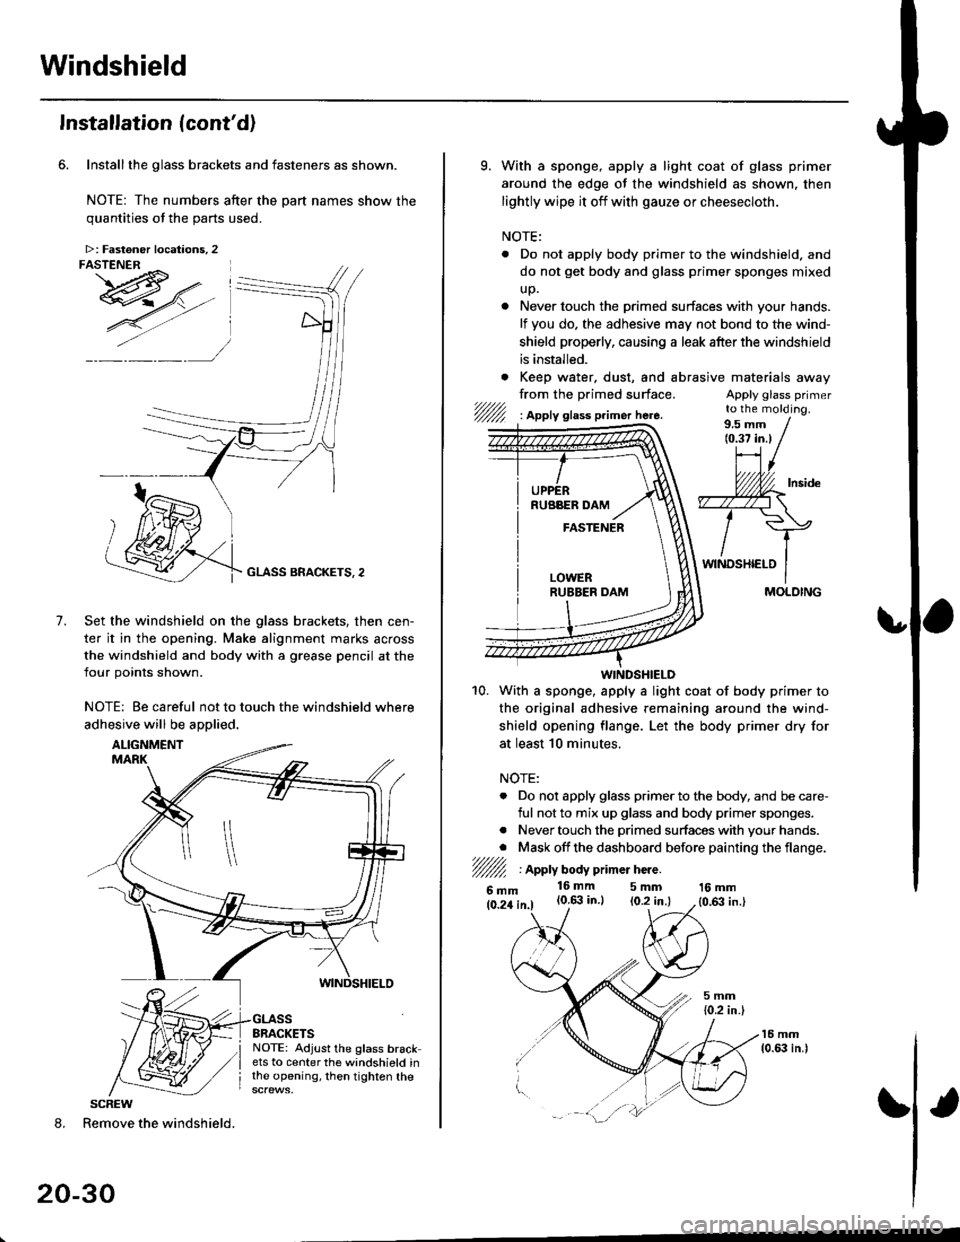 HONDA CIVIC 1997 6.G Workshop Manual Windshield
Installation (contd)
Installthe glass brackets and fasteners as shown.
NOTE: The numbers after the part names show thequantities of the oarts used.
GLASS BRACKETS, 2
Set the windshield on 